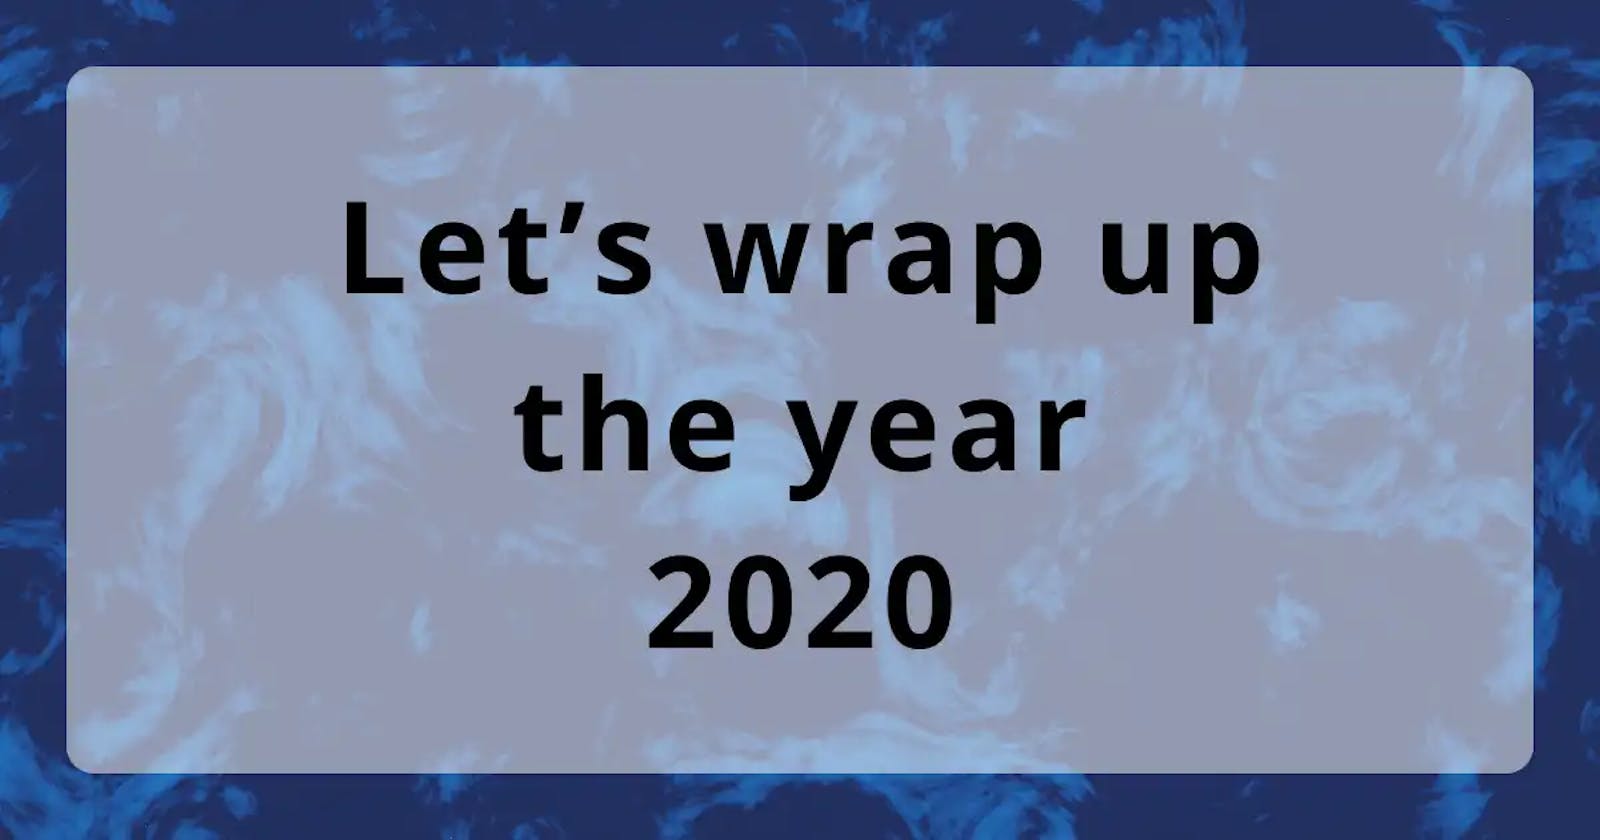 Dev Retro 2022 - The Wrapped Journal for 2022